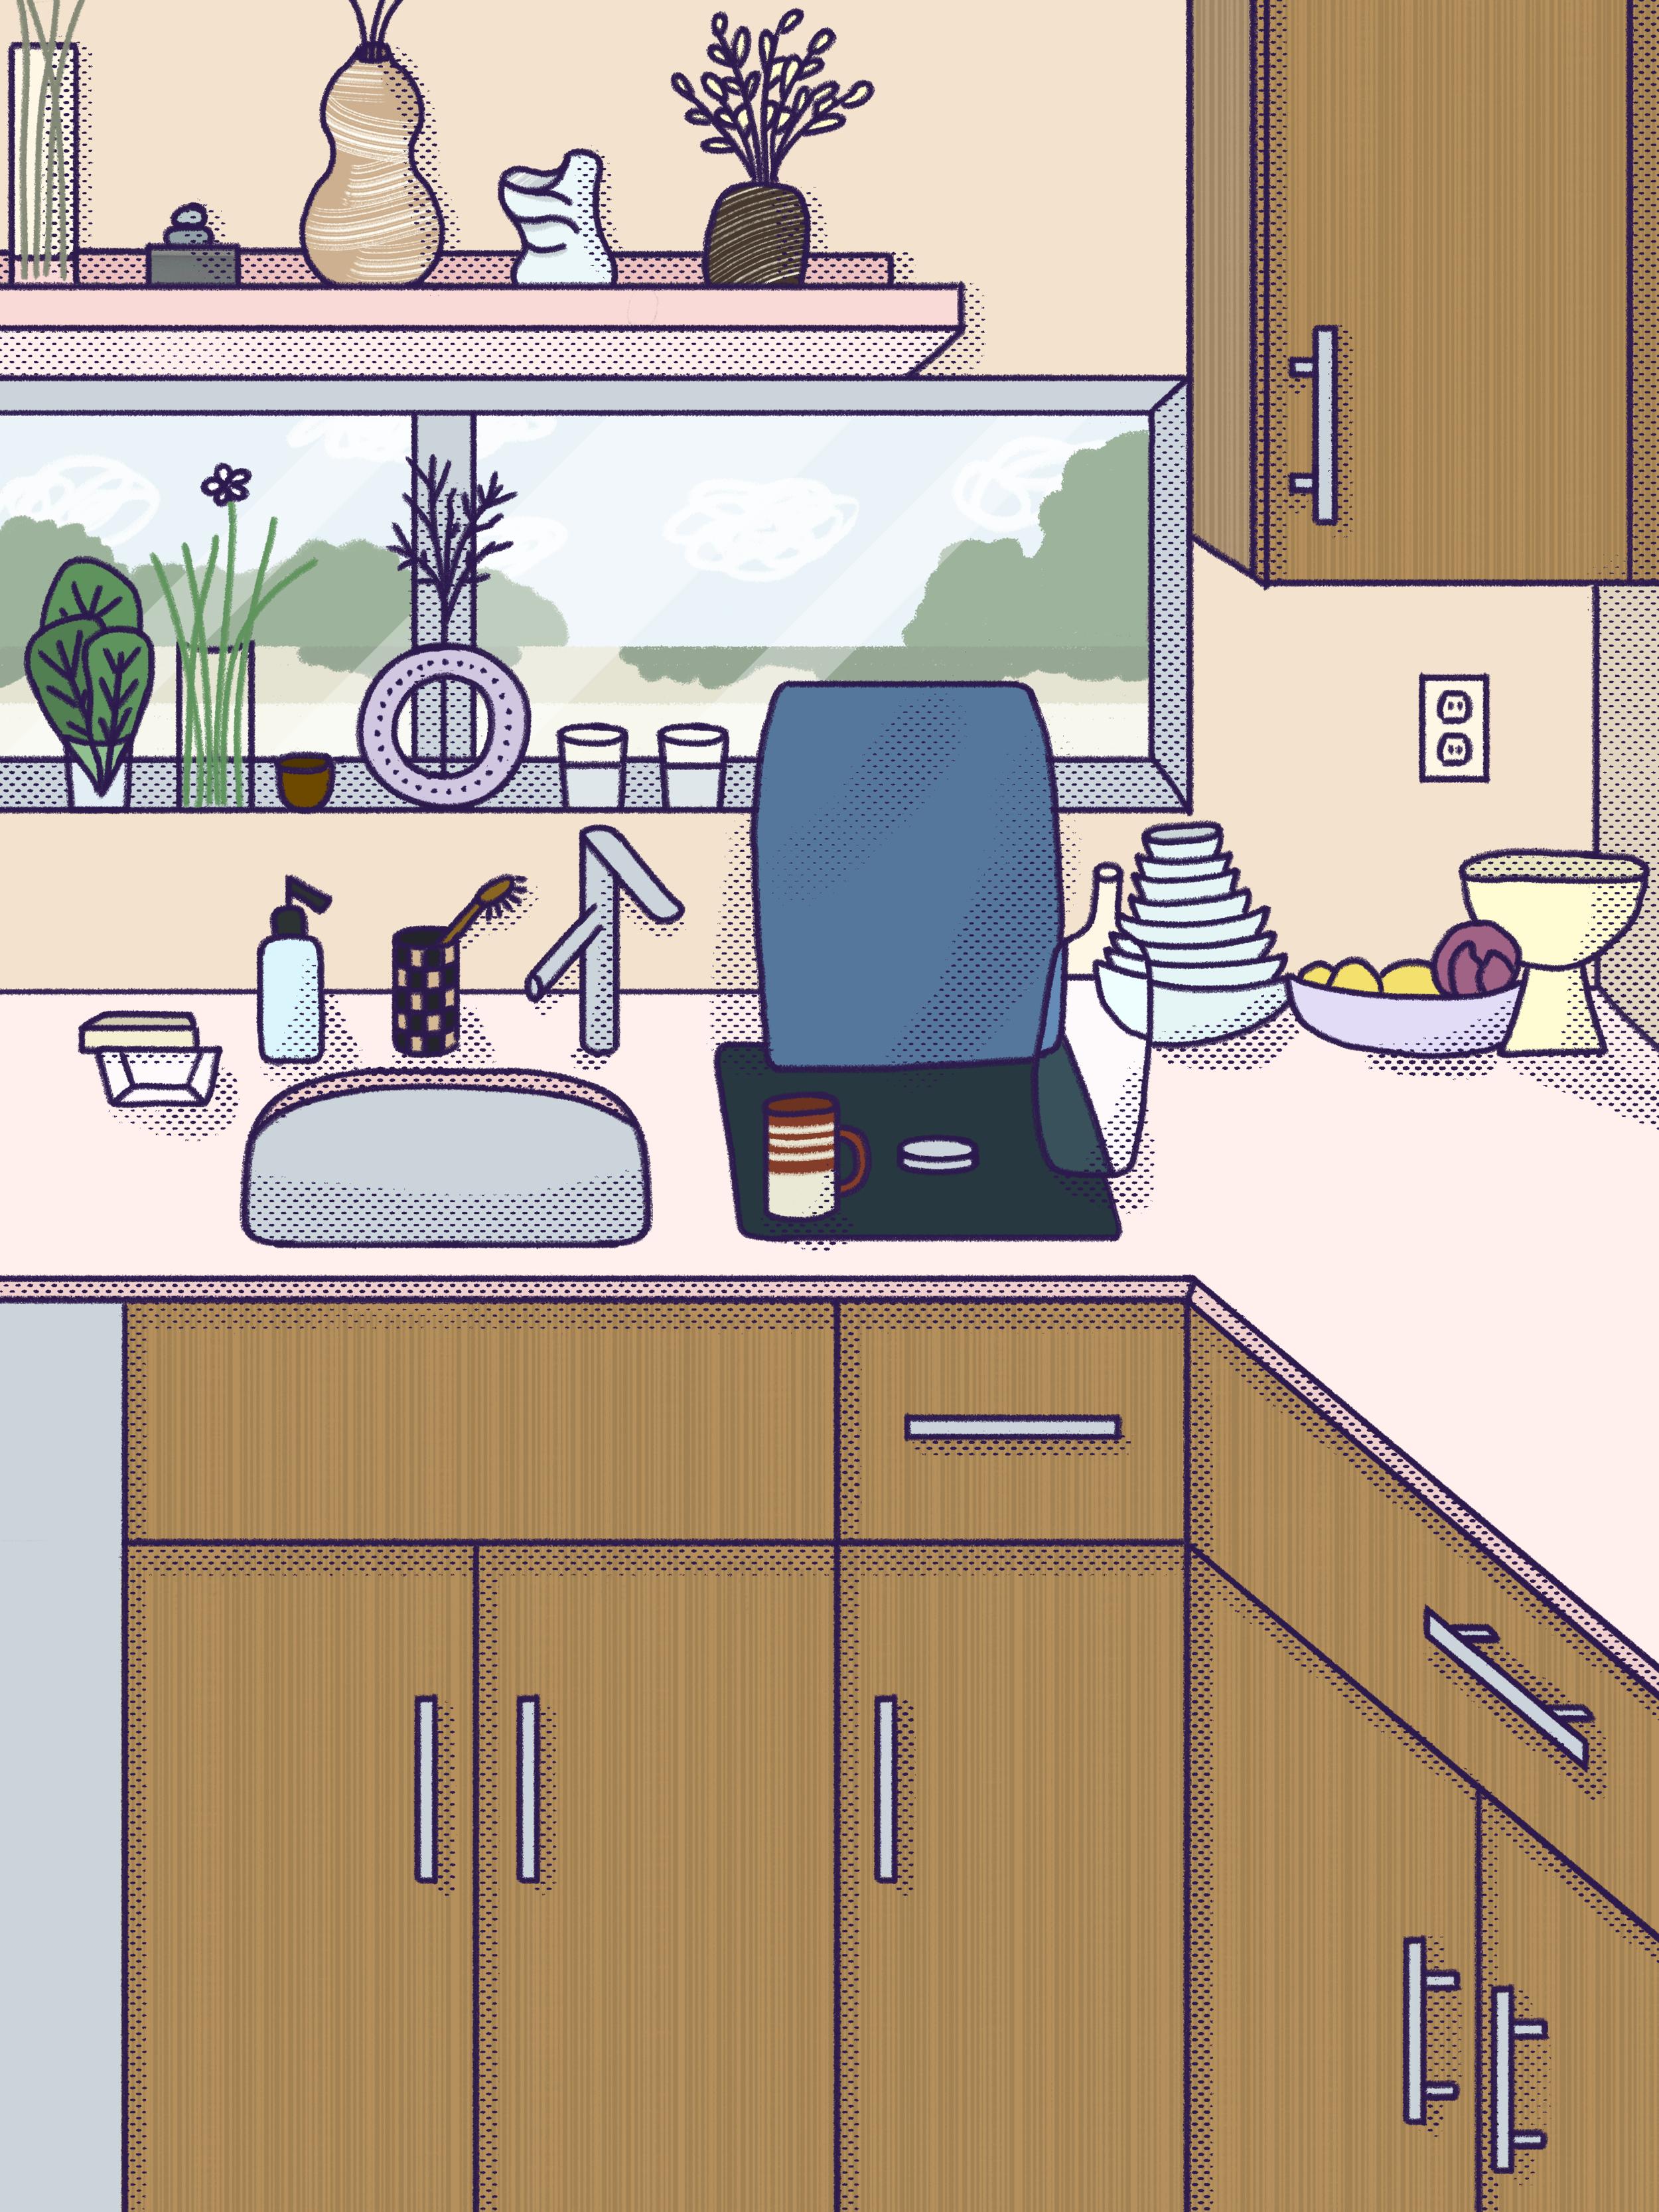 6-8-20_kitchen.png